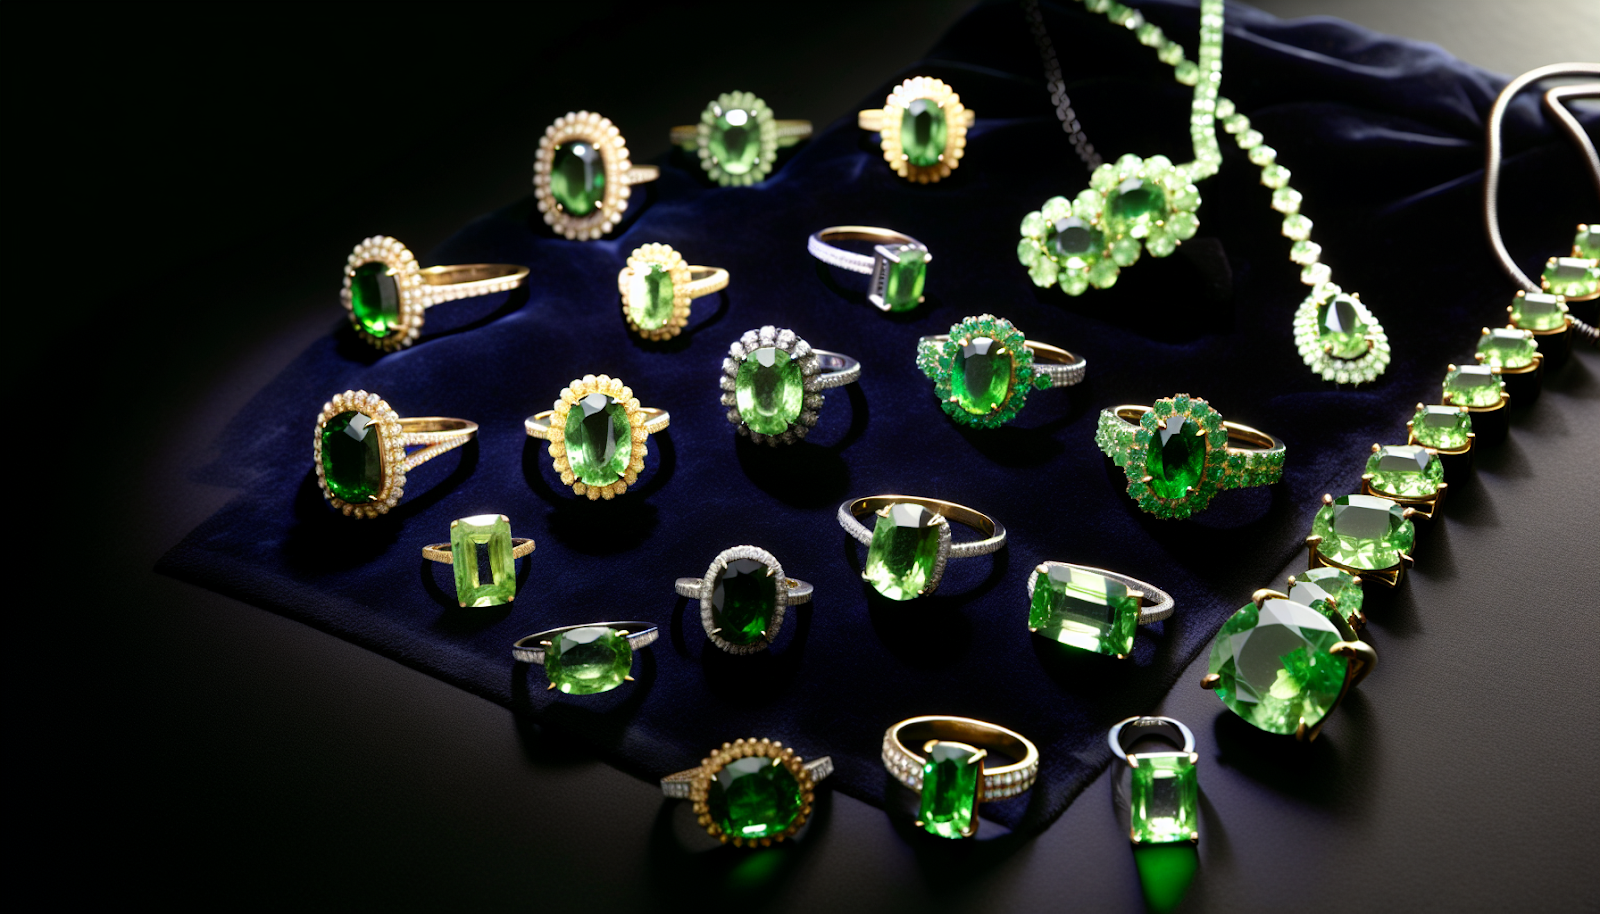 A collection of exquisite tsavorites jewelry including rings, earrings, and pendants